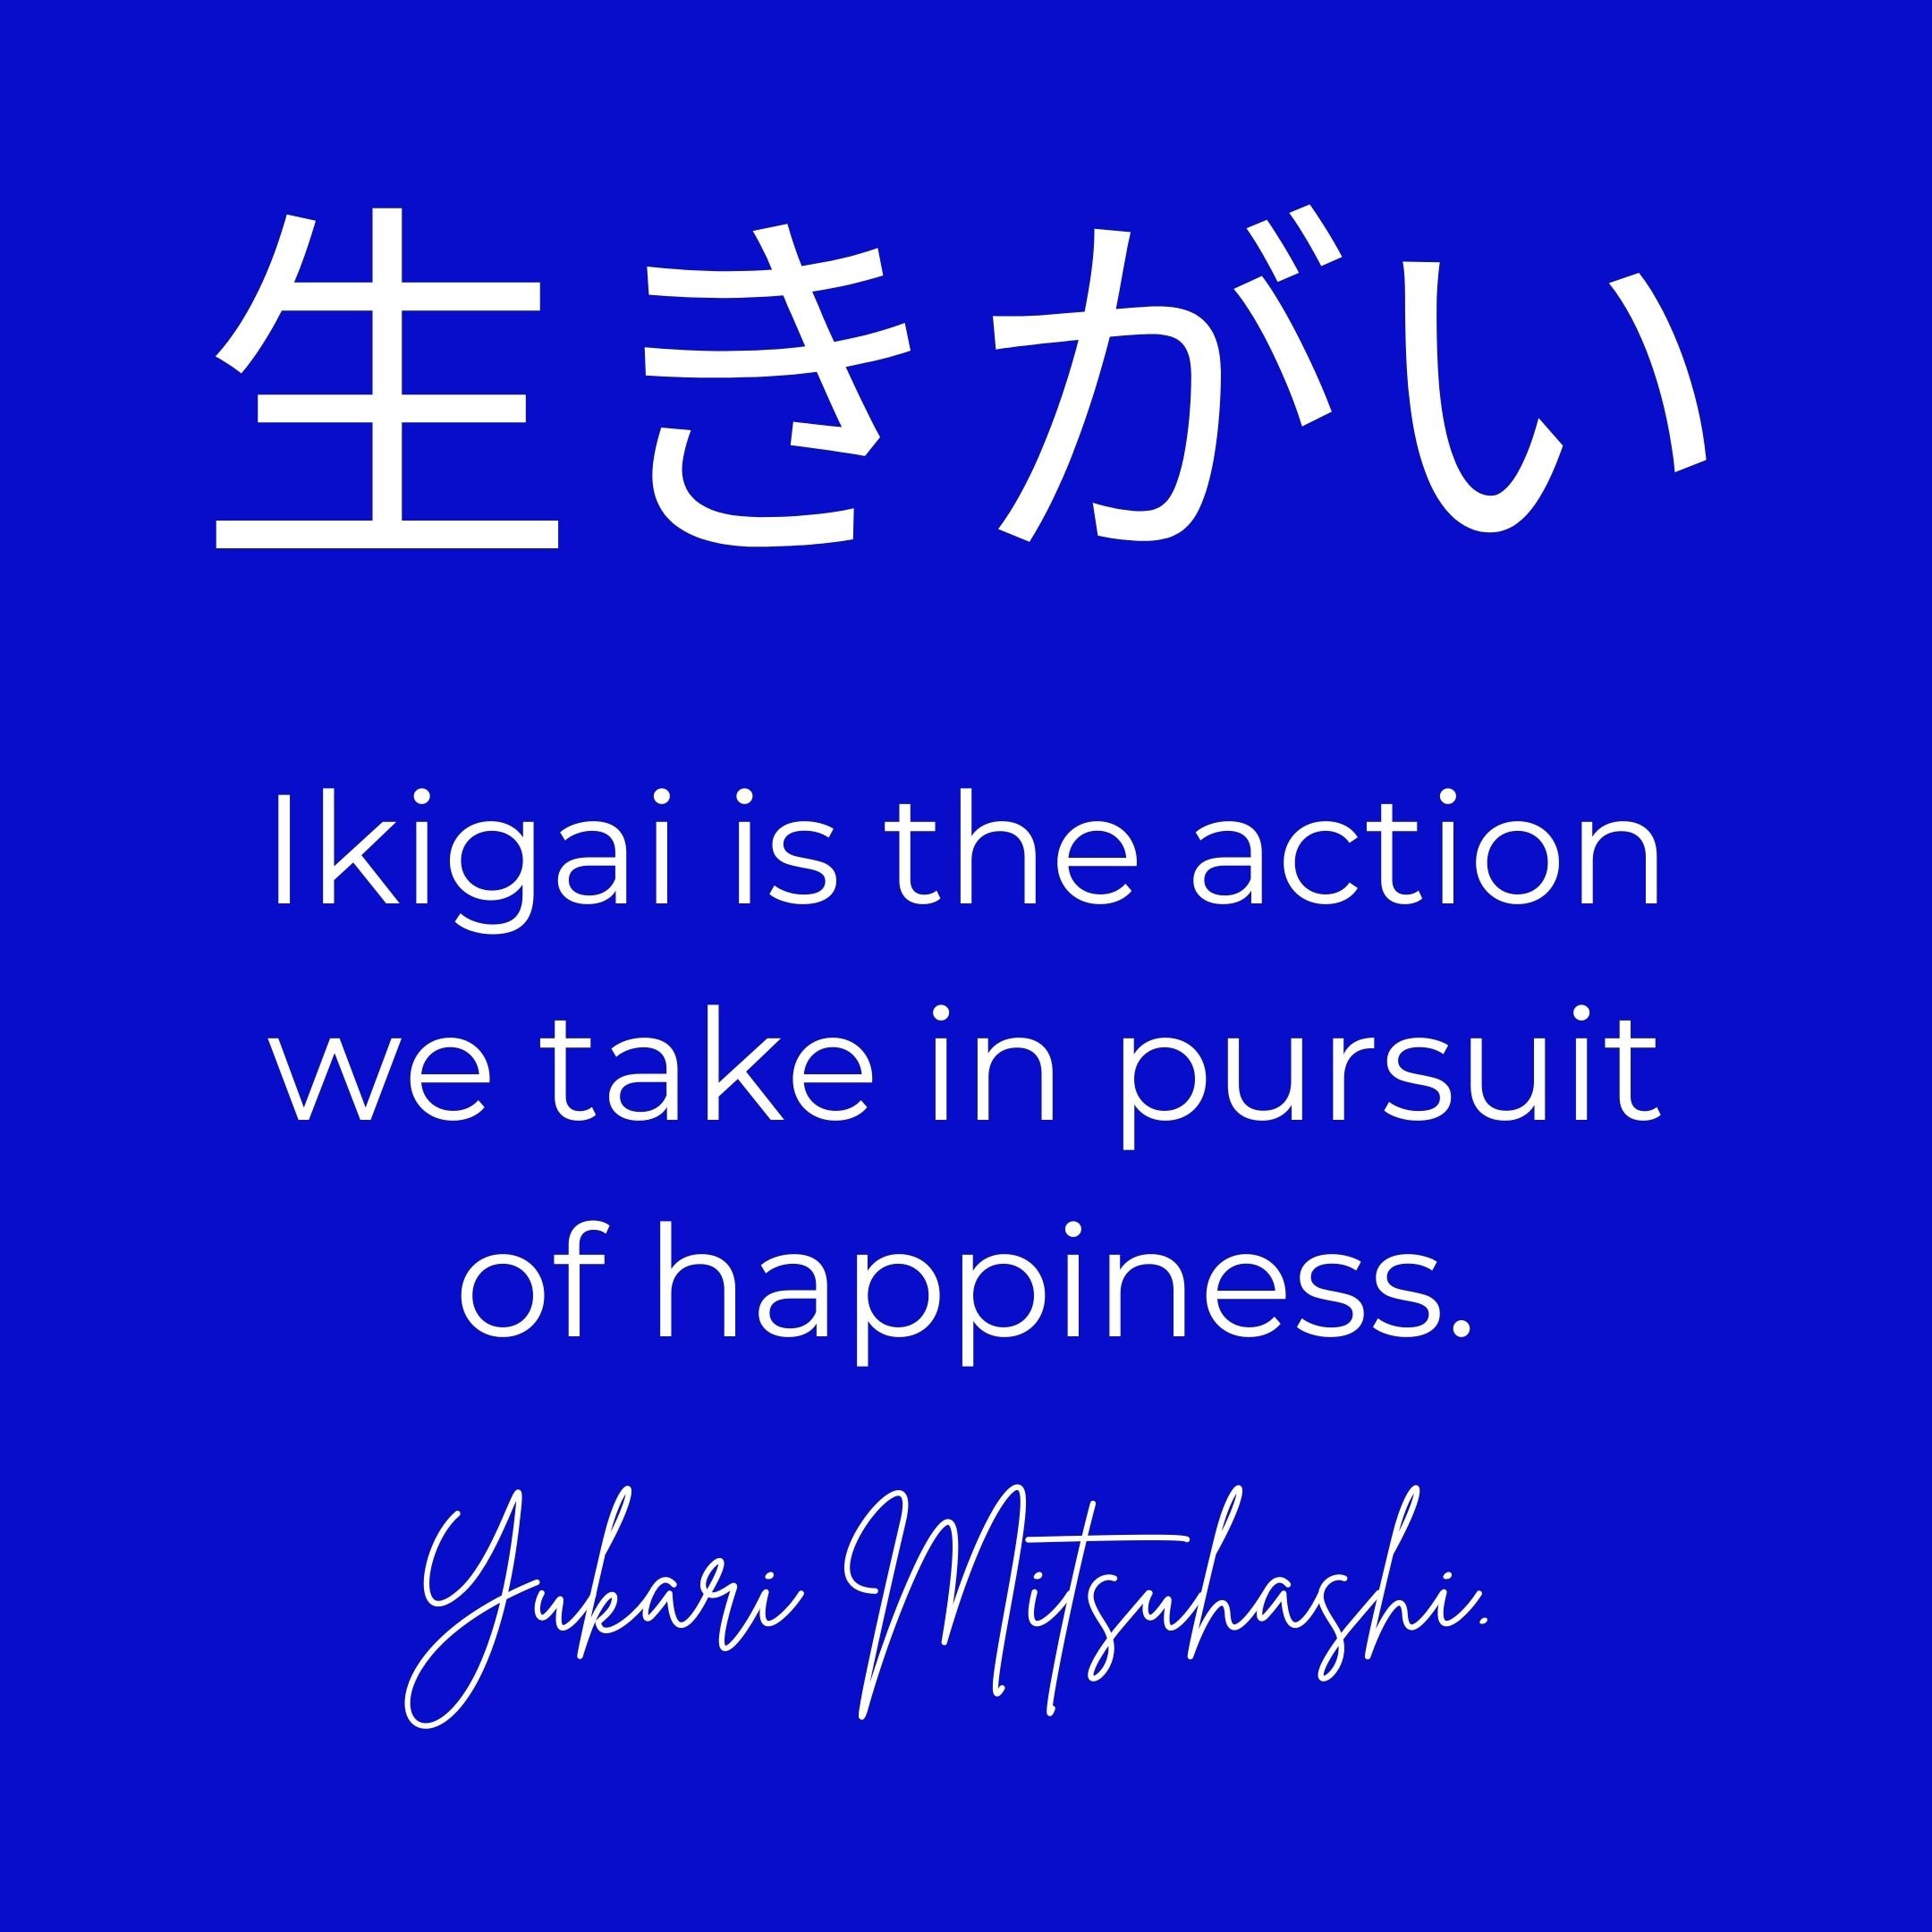 IKIGAI: What does it mean for Japanese and your job?